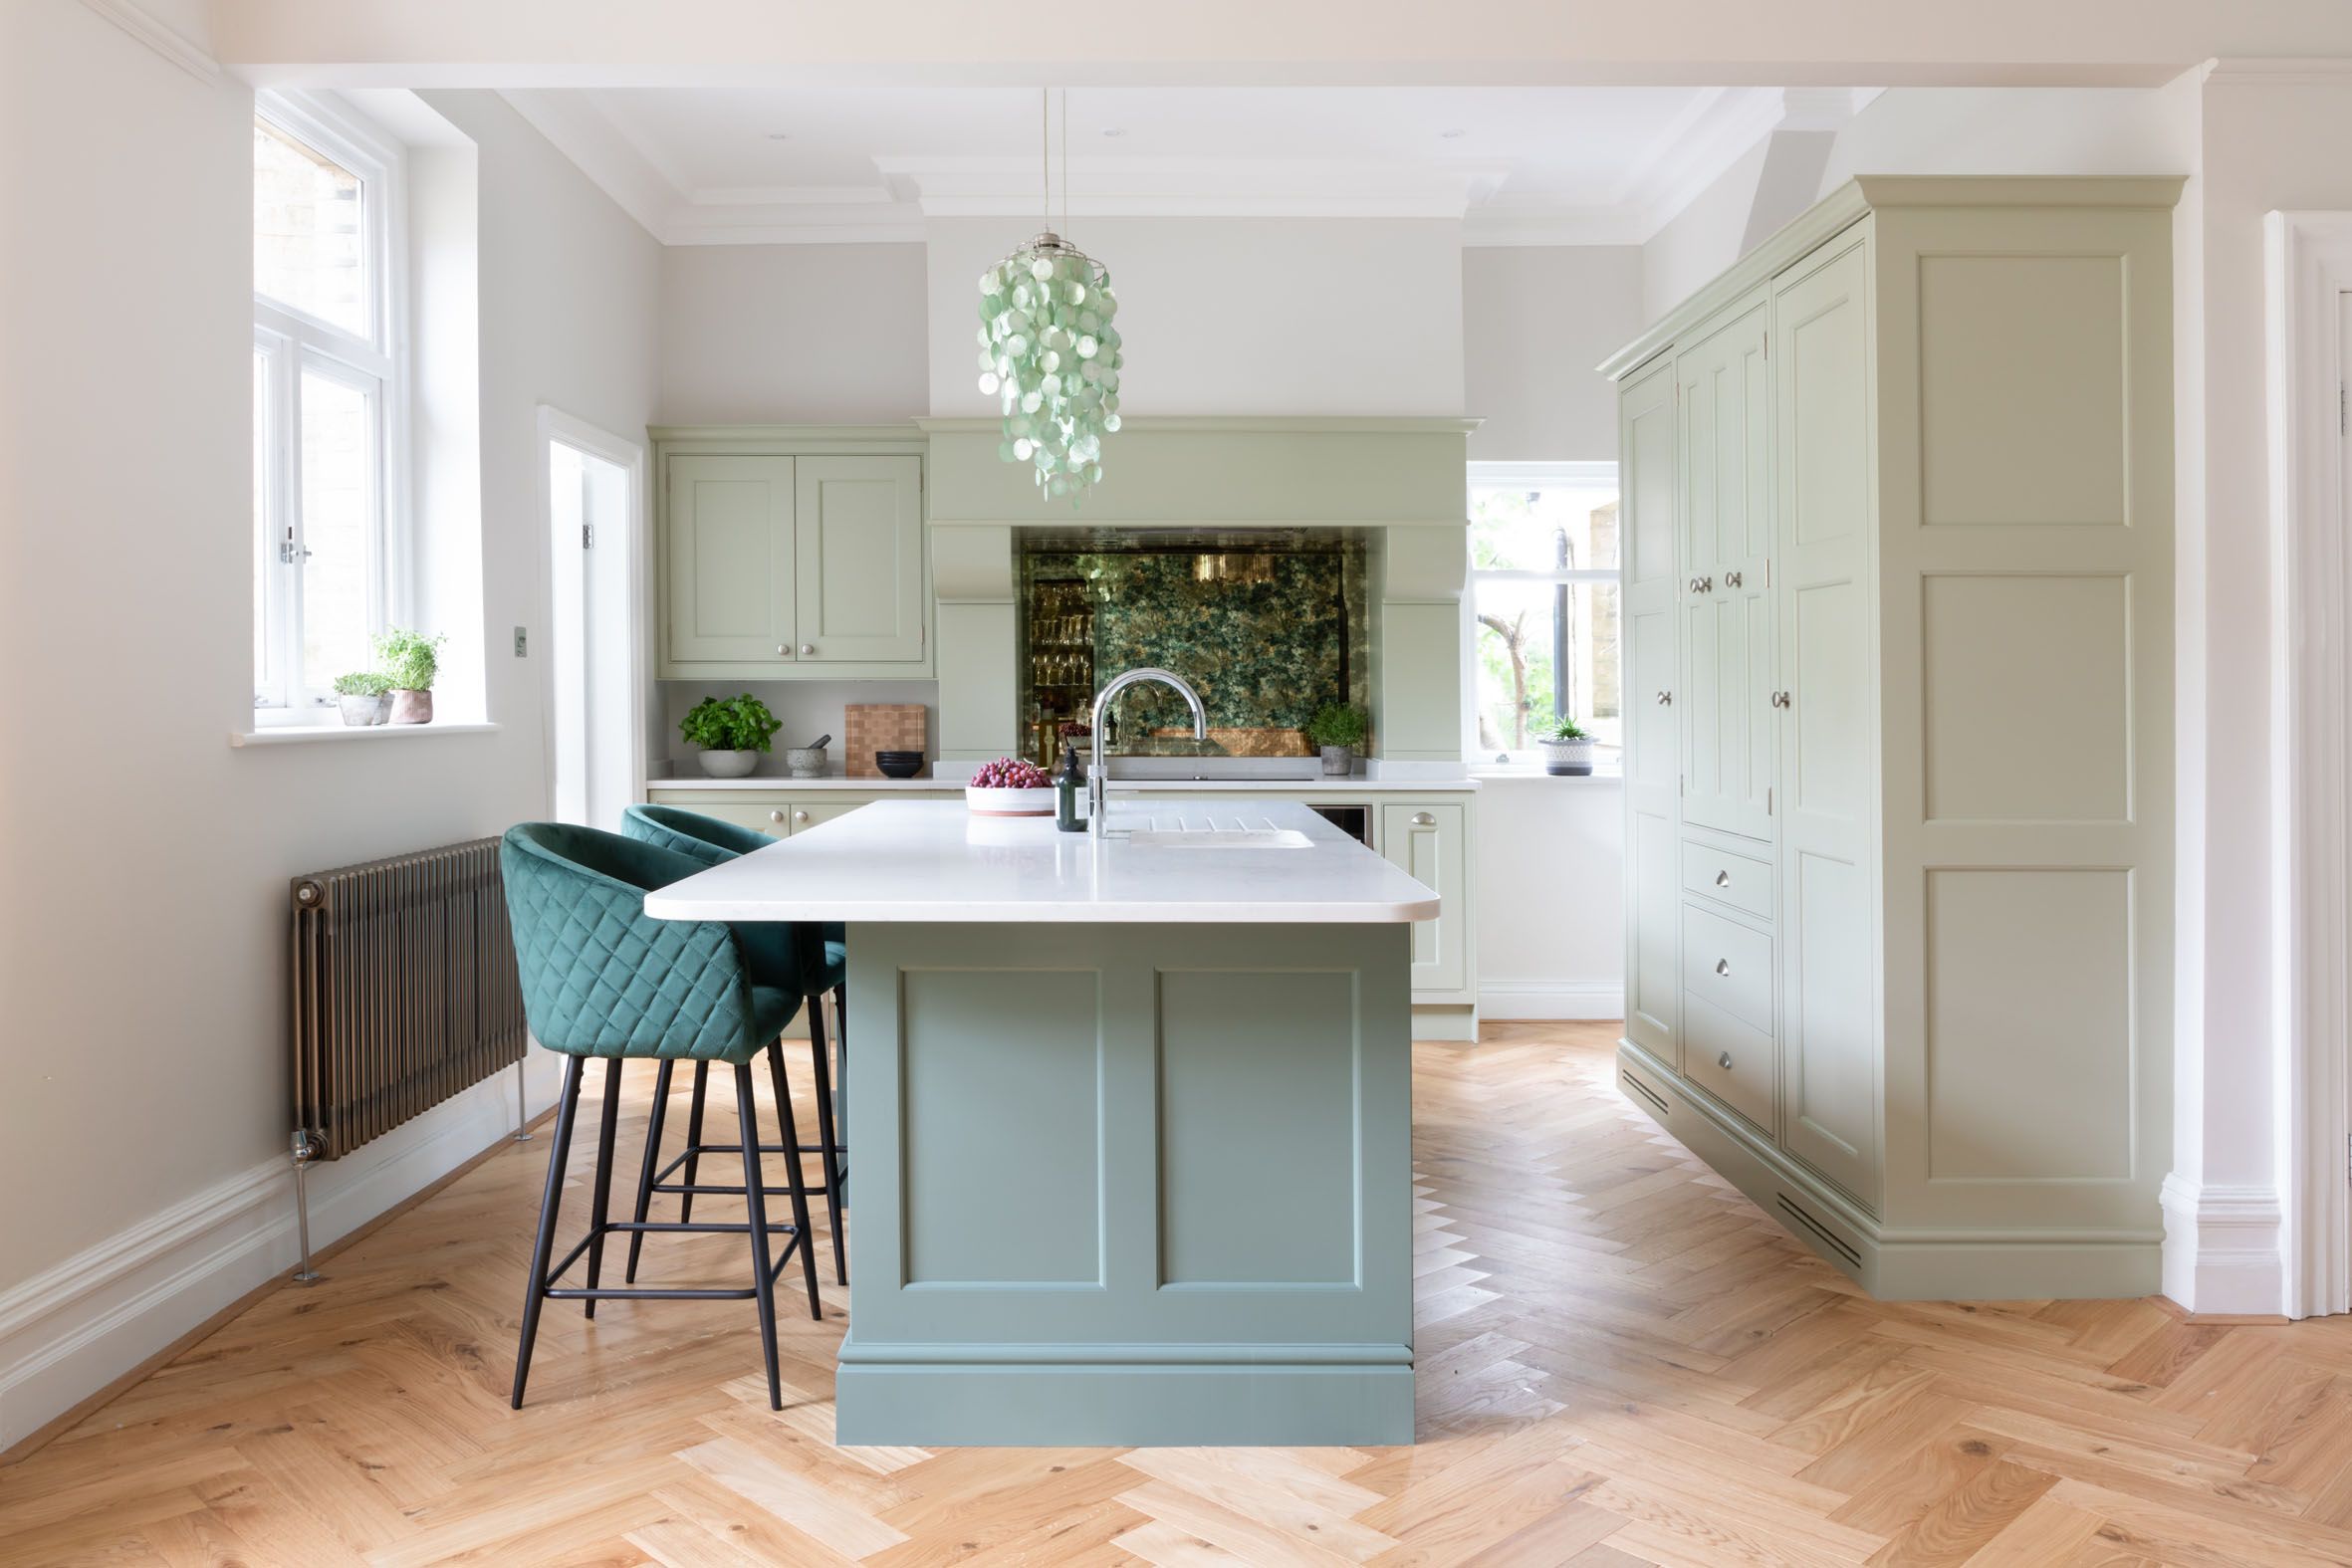 20 Kitchen Trends These Are the Kitchen Trends You'll Be Seeing ...